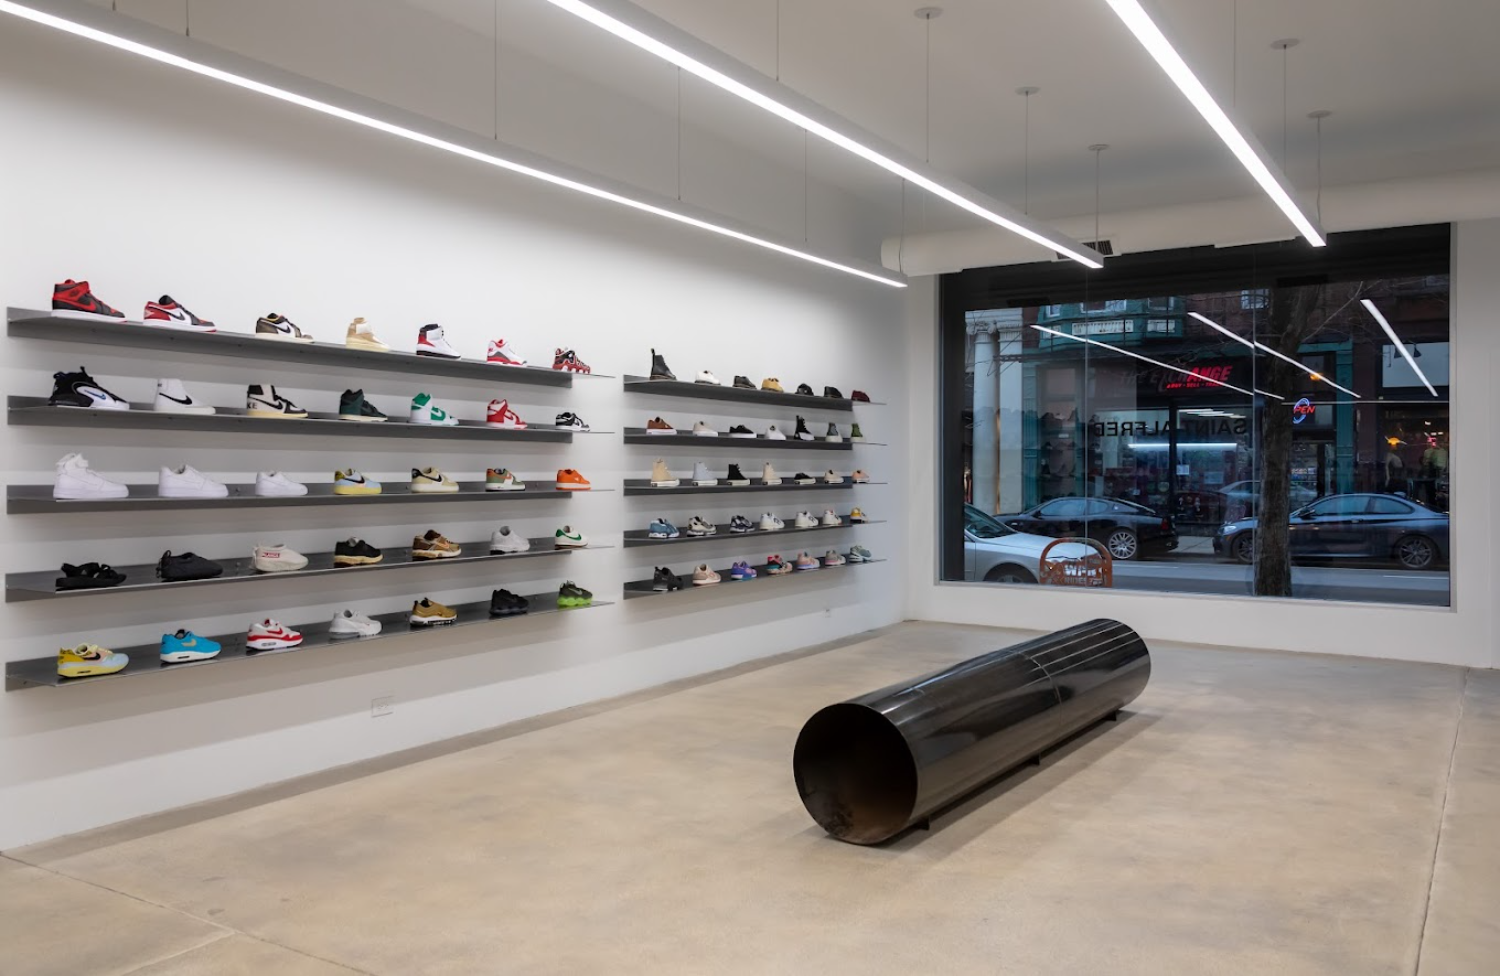 sneakers placed on black shelves, black cylinder on the floor, window facing outdoor street